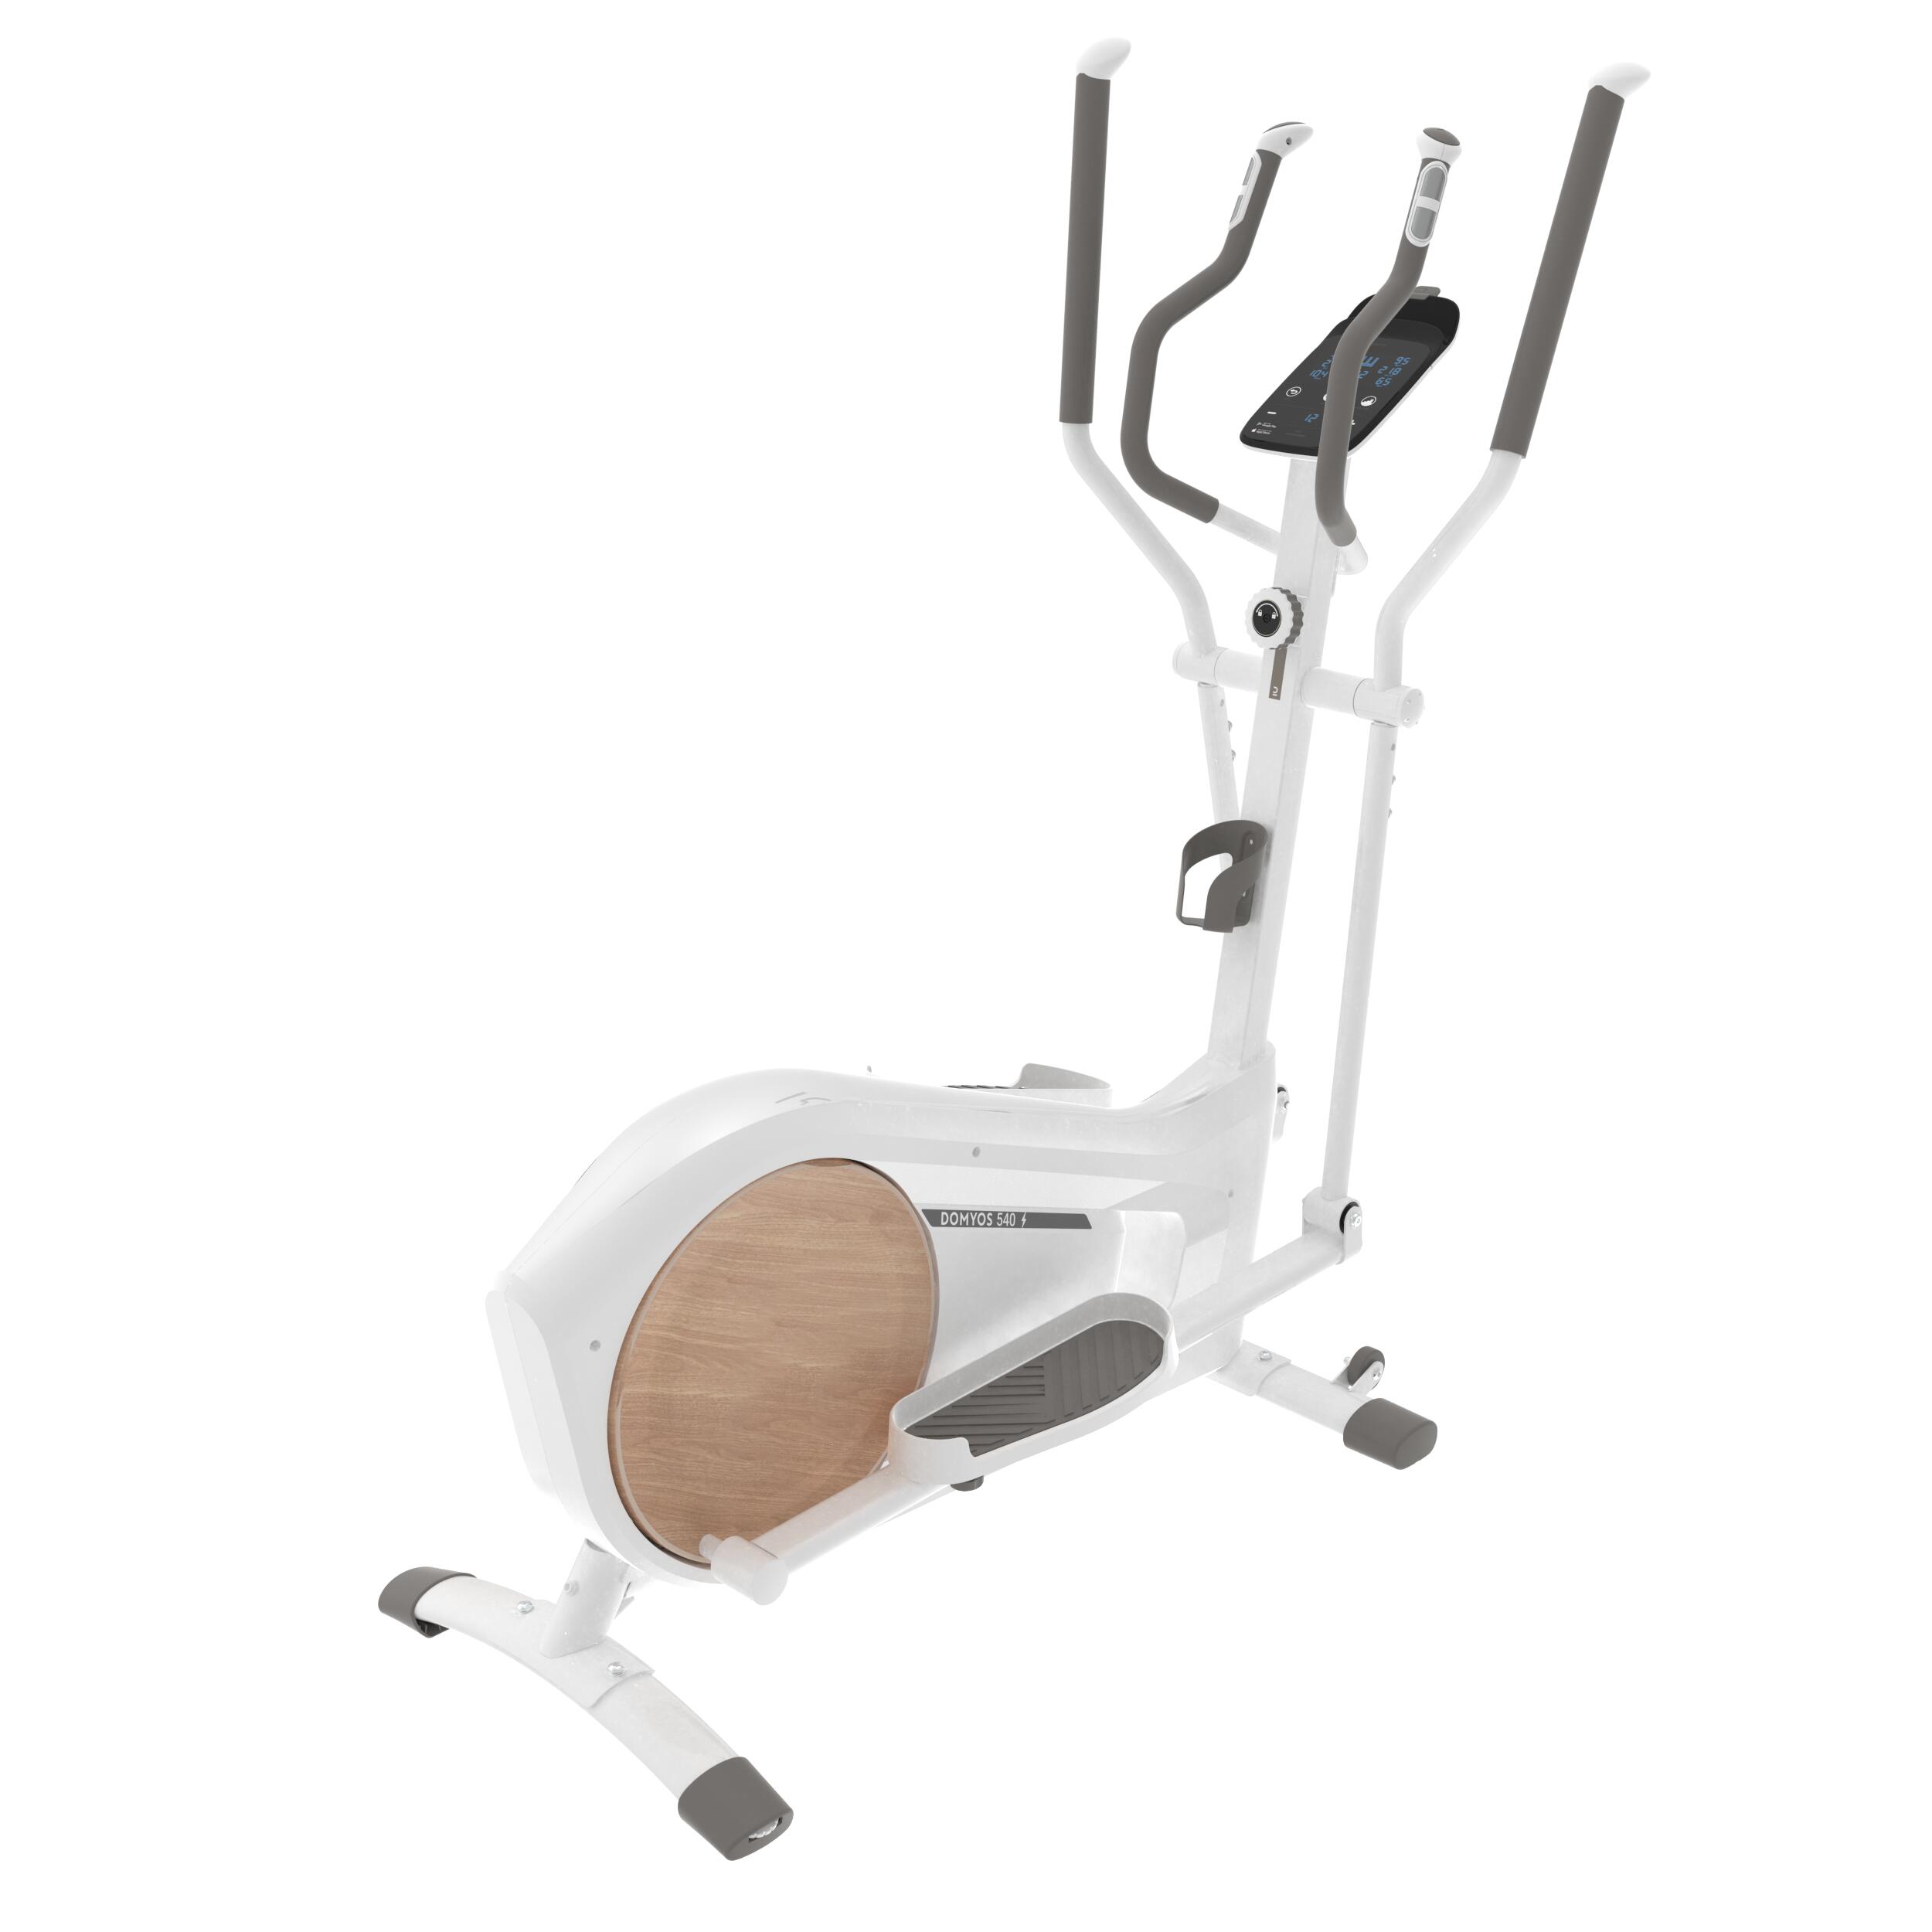 Self-Powered and Connected, E-Connected & Kinomap Compatible Cross Trainer EL540 1/3